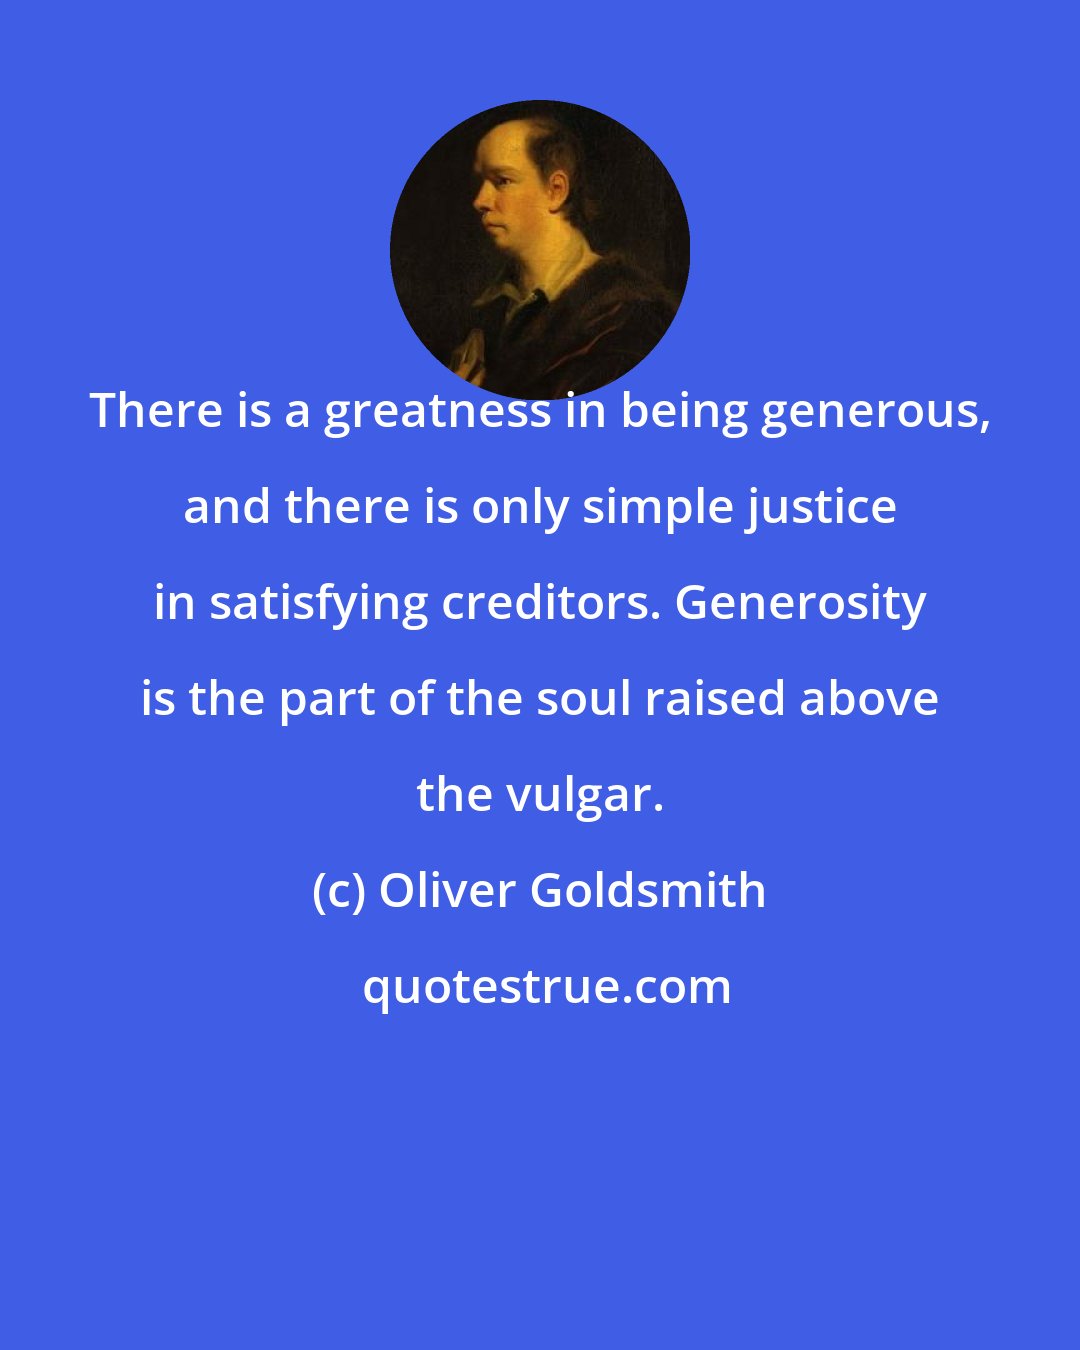 Oliver Goldsmith: There is a greatness in being generous, and there is only simple justice in satisfying creditors. Generosity is the part of the soul raised above the vulgar.